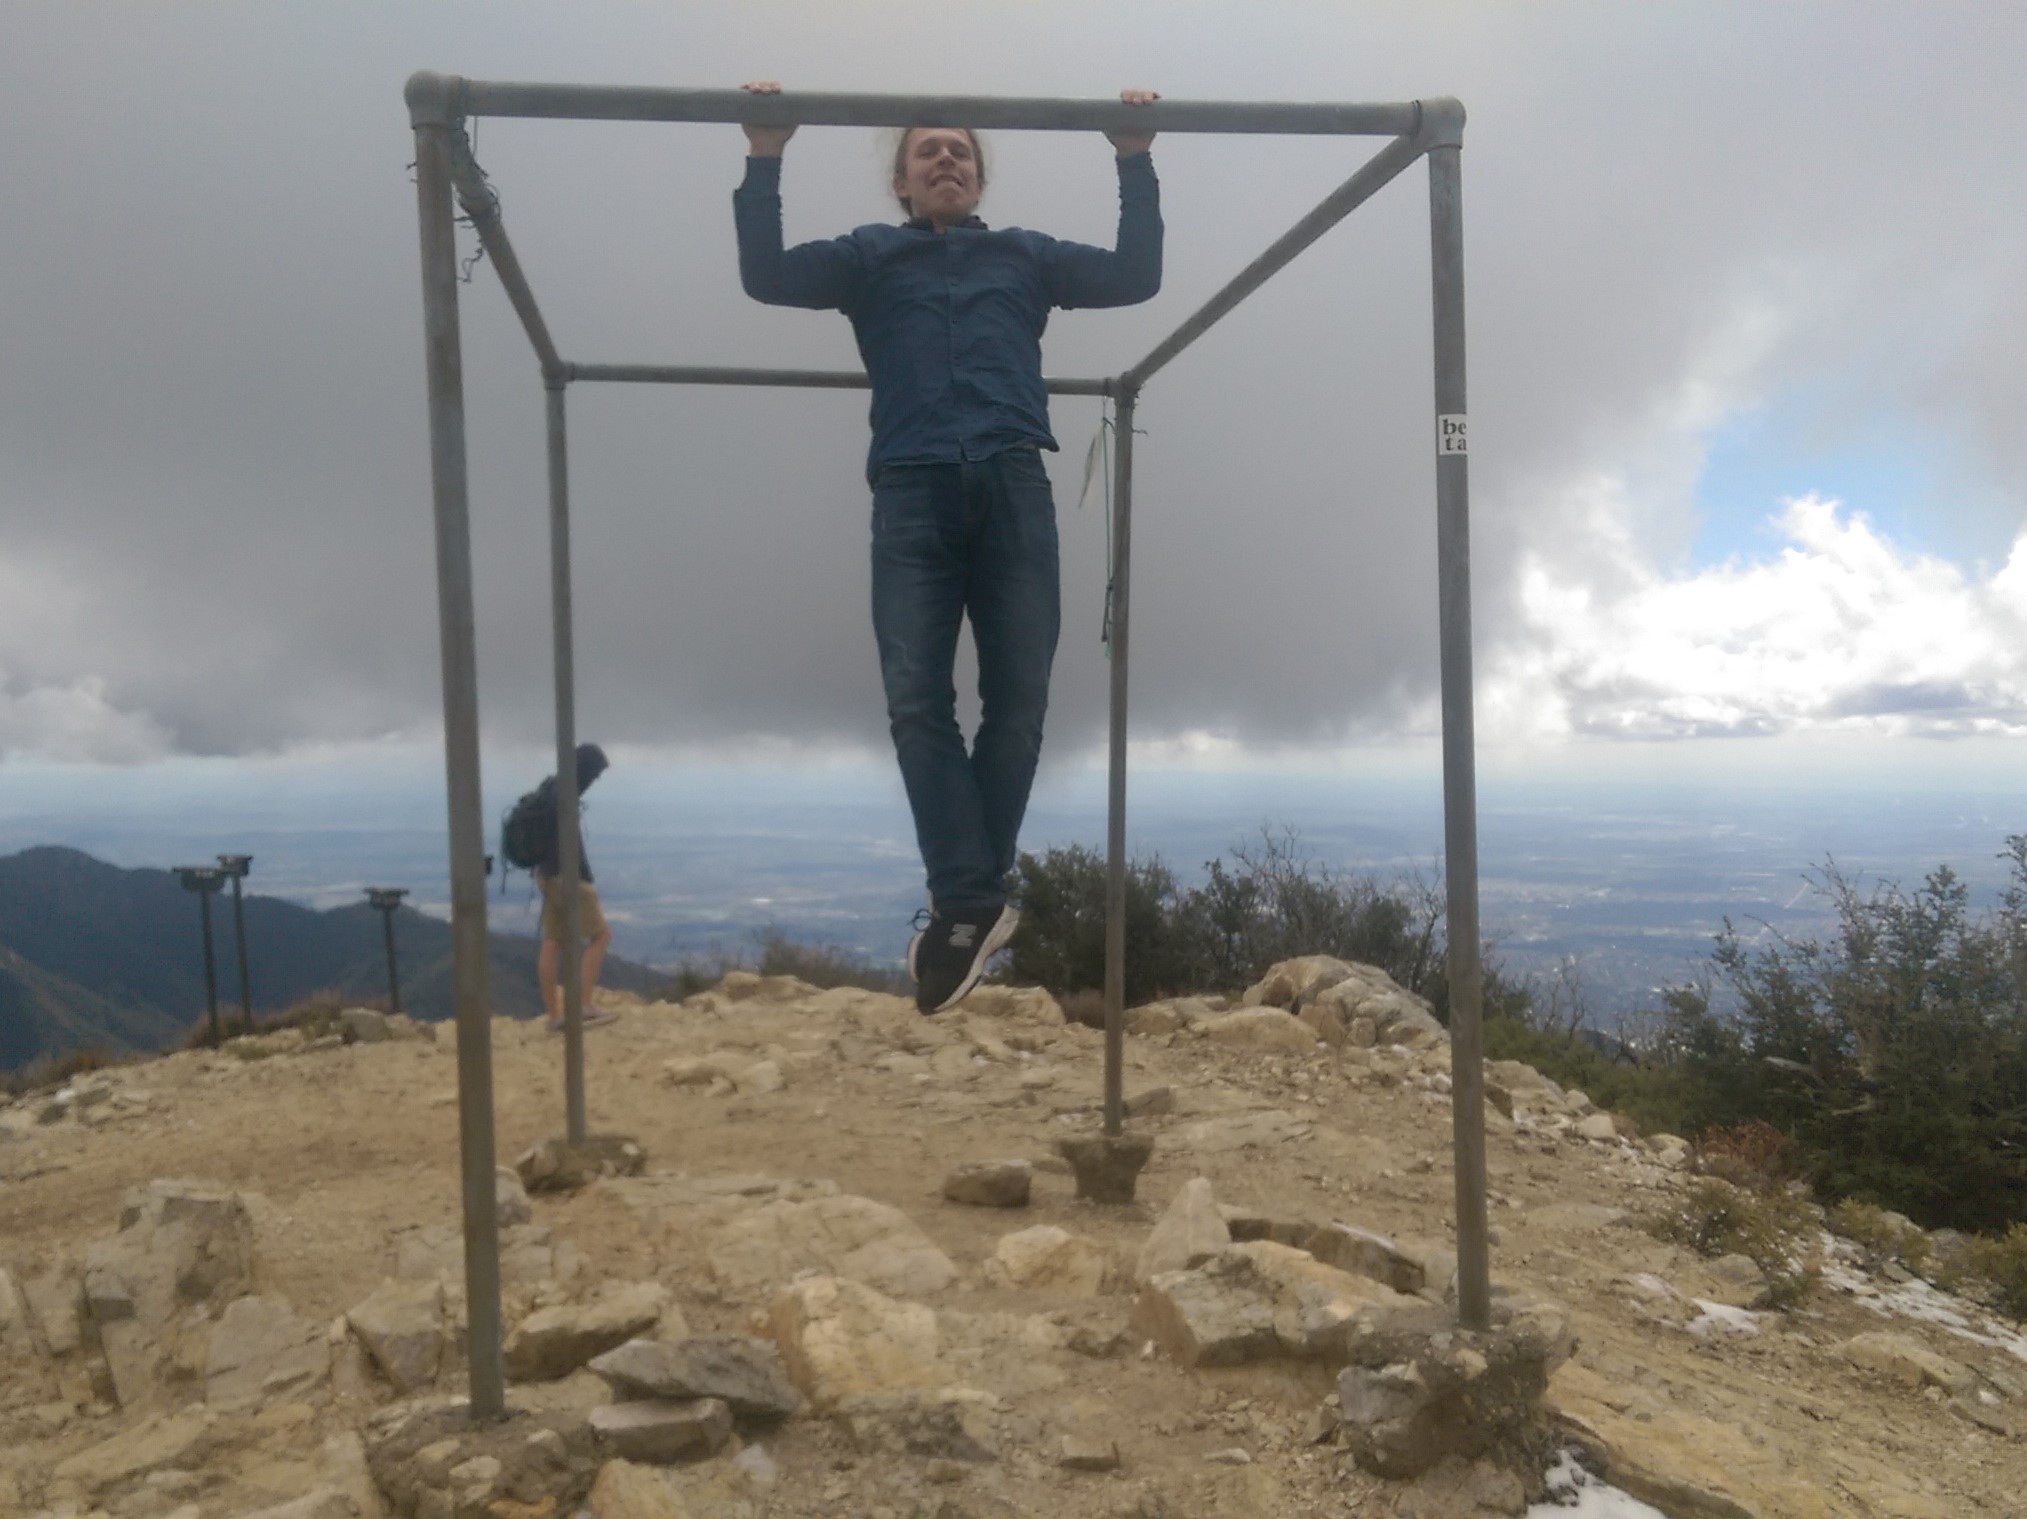 Roman is doing a pull-up on top of the mountain